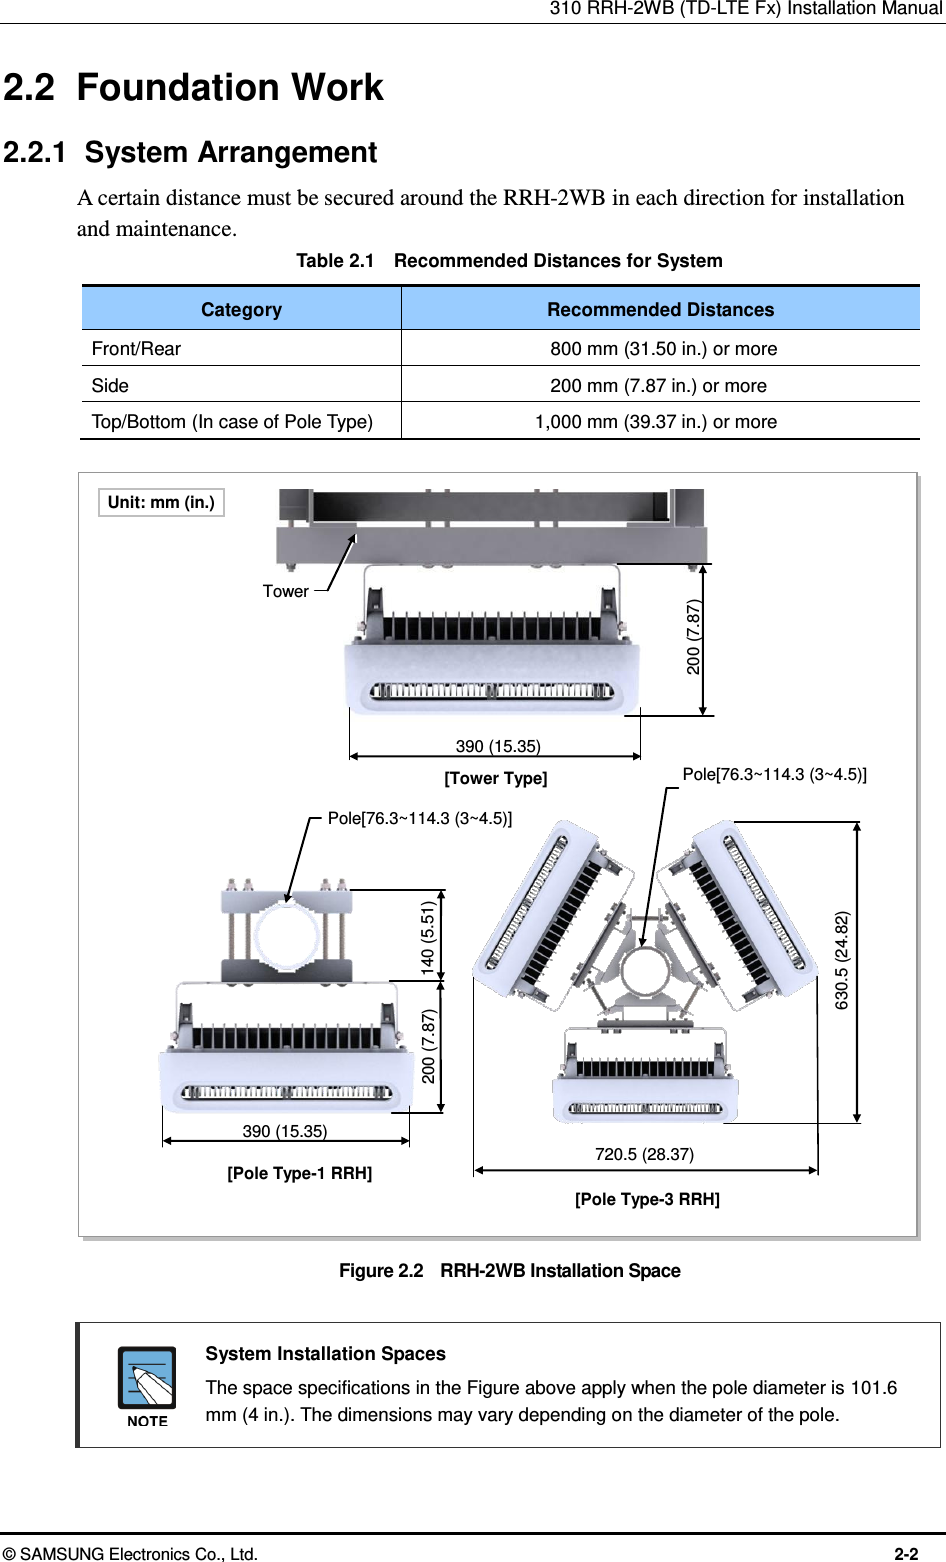 310 RRH-2WB (TD-LTE Fx) Installation Manual  © SAMSUNG Electronics Co., Ltd.  2-2 2.2  Foundation Work 2.2.1  System Arrangement A certain distance must be secured around the RRH-2WB in each direction for installation and maintenance. Table 2.1    Recommended Distances for System Category Recommended Distances Front/Rear 800 mm (31.50 in.) or more Side 200 mm (7.87 in.) or more Top/Bottom (In case of Pole Type) 1,000 mm (39.37 in.) or more  Figure 2.2    RRH-2WB Installation Space   System Installation Spaces   The space specifications in the Figure above apply when the pole diameter is 101.6 mm (4 in.). The dimensions may vary depending on the diameter of the pole. Pole[76.3~114.3 (3~4.5)]  [Pole Type-3 RRH] 630.5 (24.82) 720.5 (28.37) Pole[76.3~114.3 (3~4.5)] [Pole Type-1 RRH] 390 (15.35) 140 (5.51) 200 (7.87) 390 (15.35) [Tower Type] 200 (7.87) Tower Unit: mm (in.) 